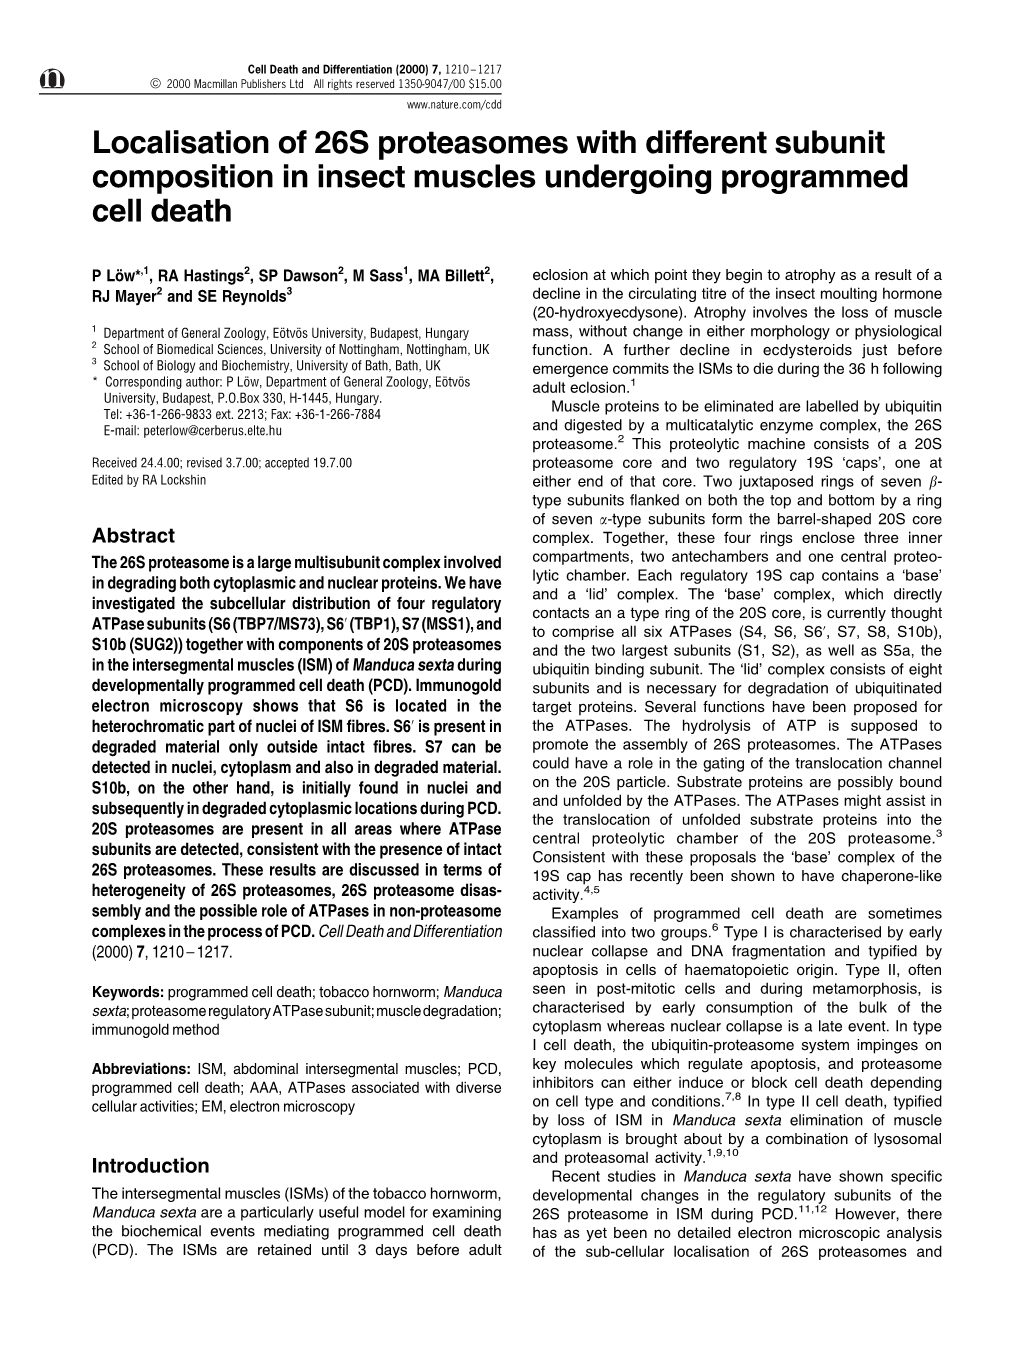 Localisation of 26S Proteasomes with Different Subunit Composition in Insect Muscles Undergoing Programmed Cell Death